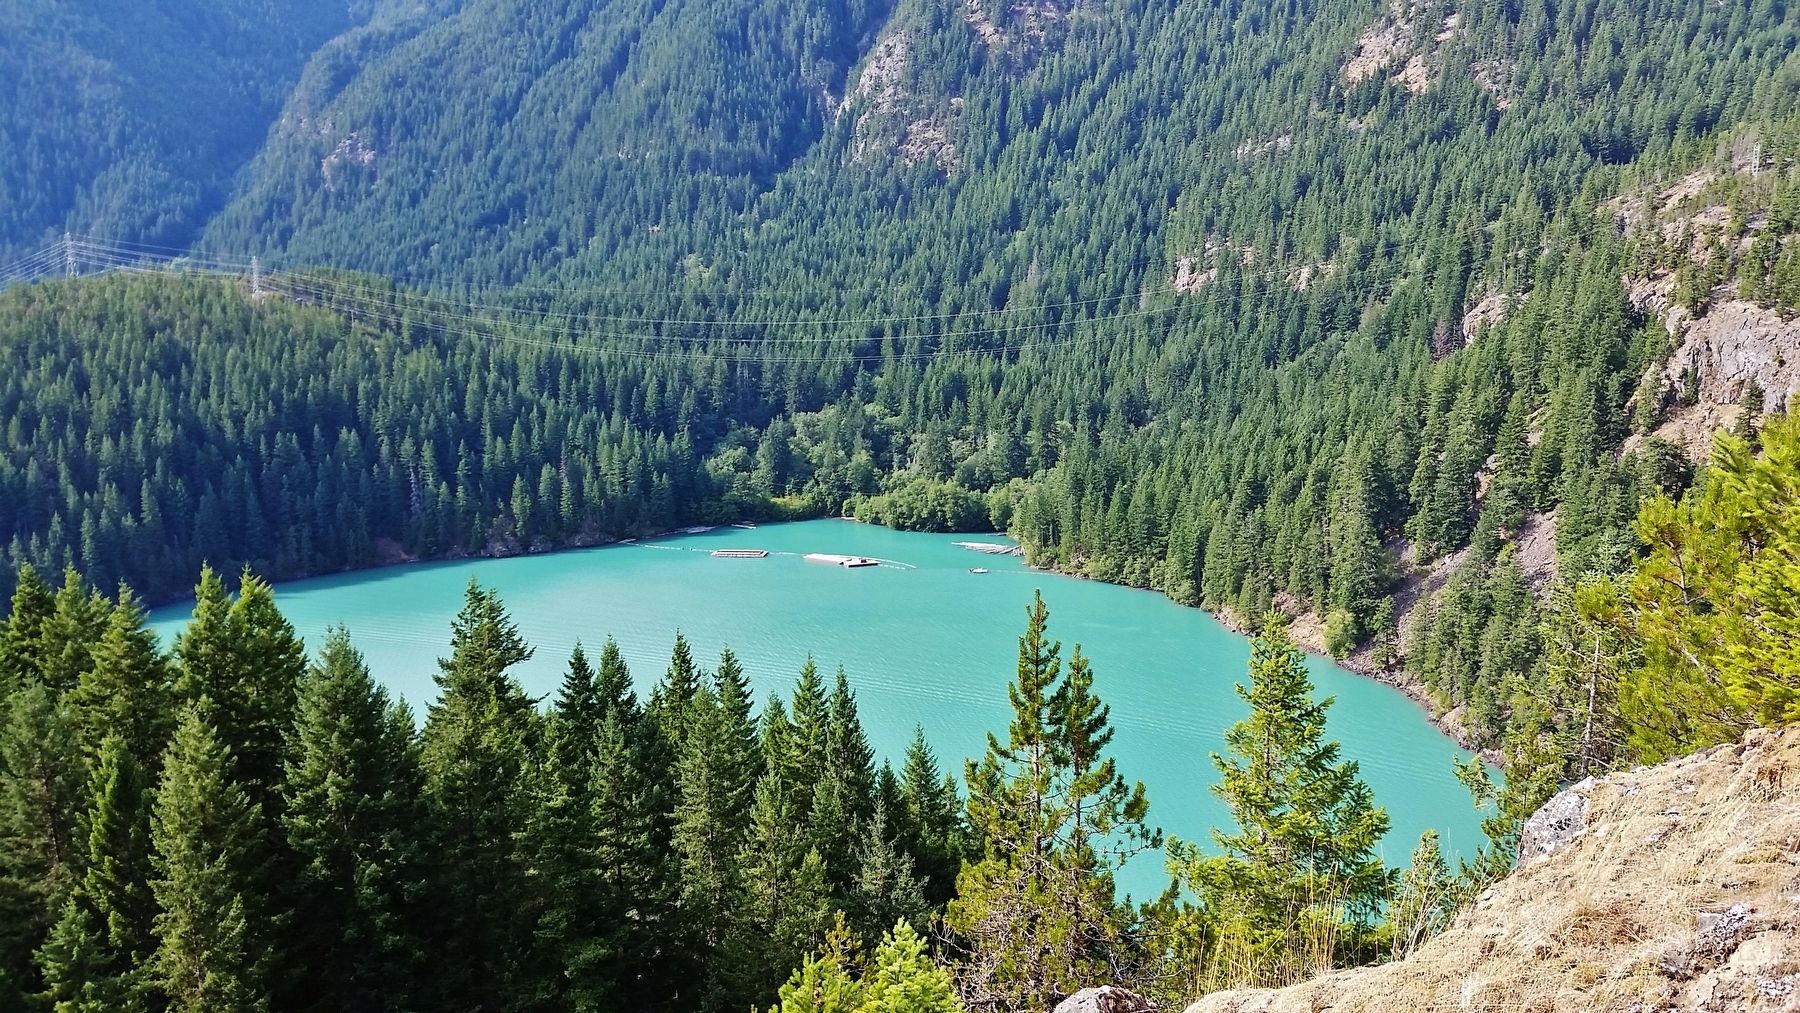 Power Transmission Lines over nearby Diablo Lake (Skagit River) image. Click for full size.